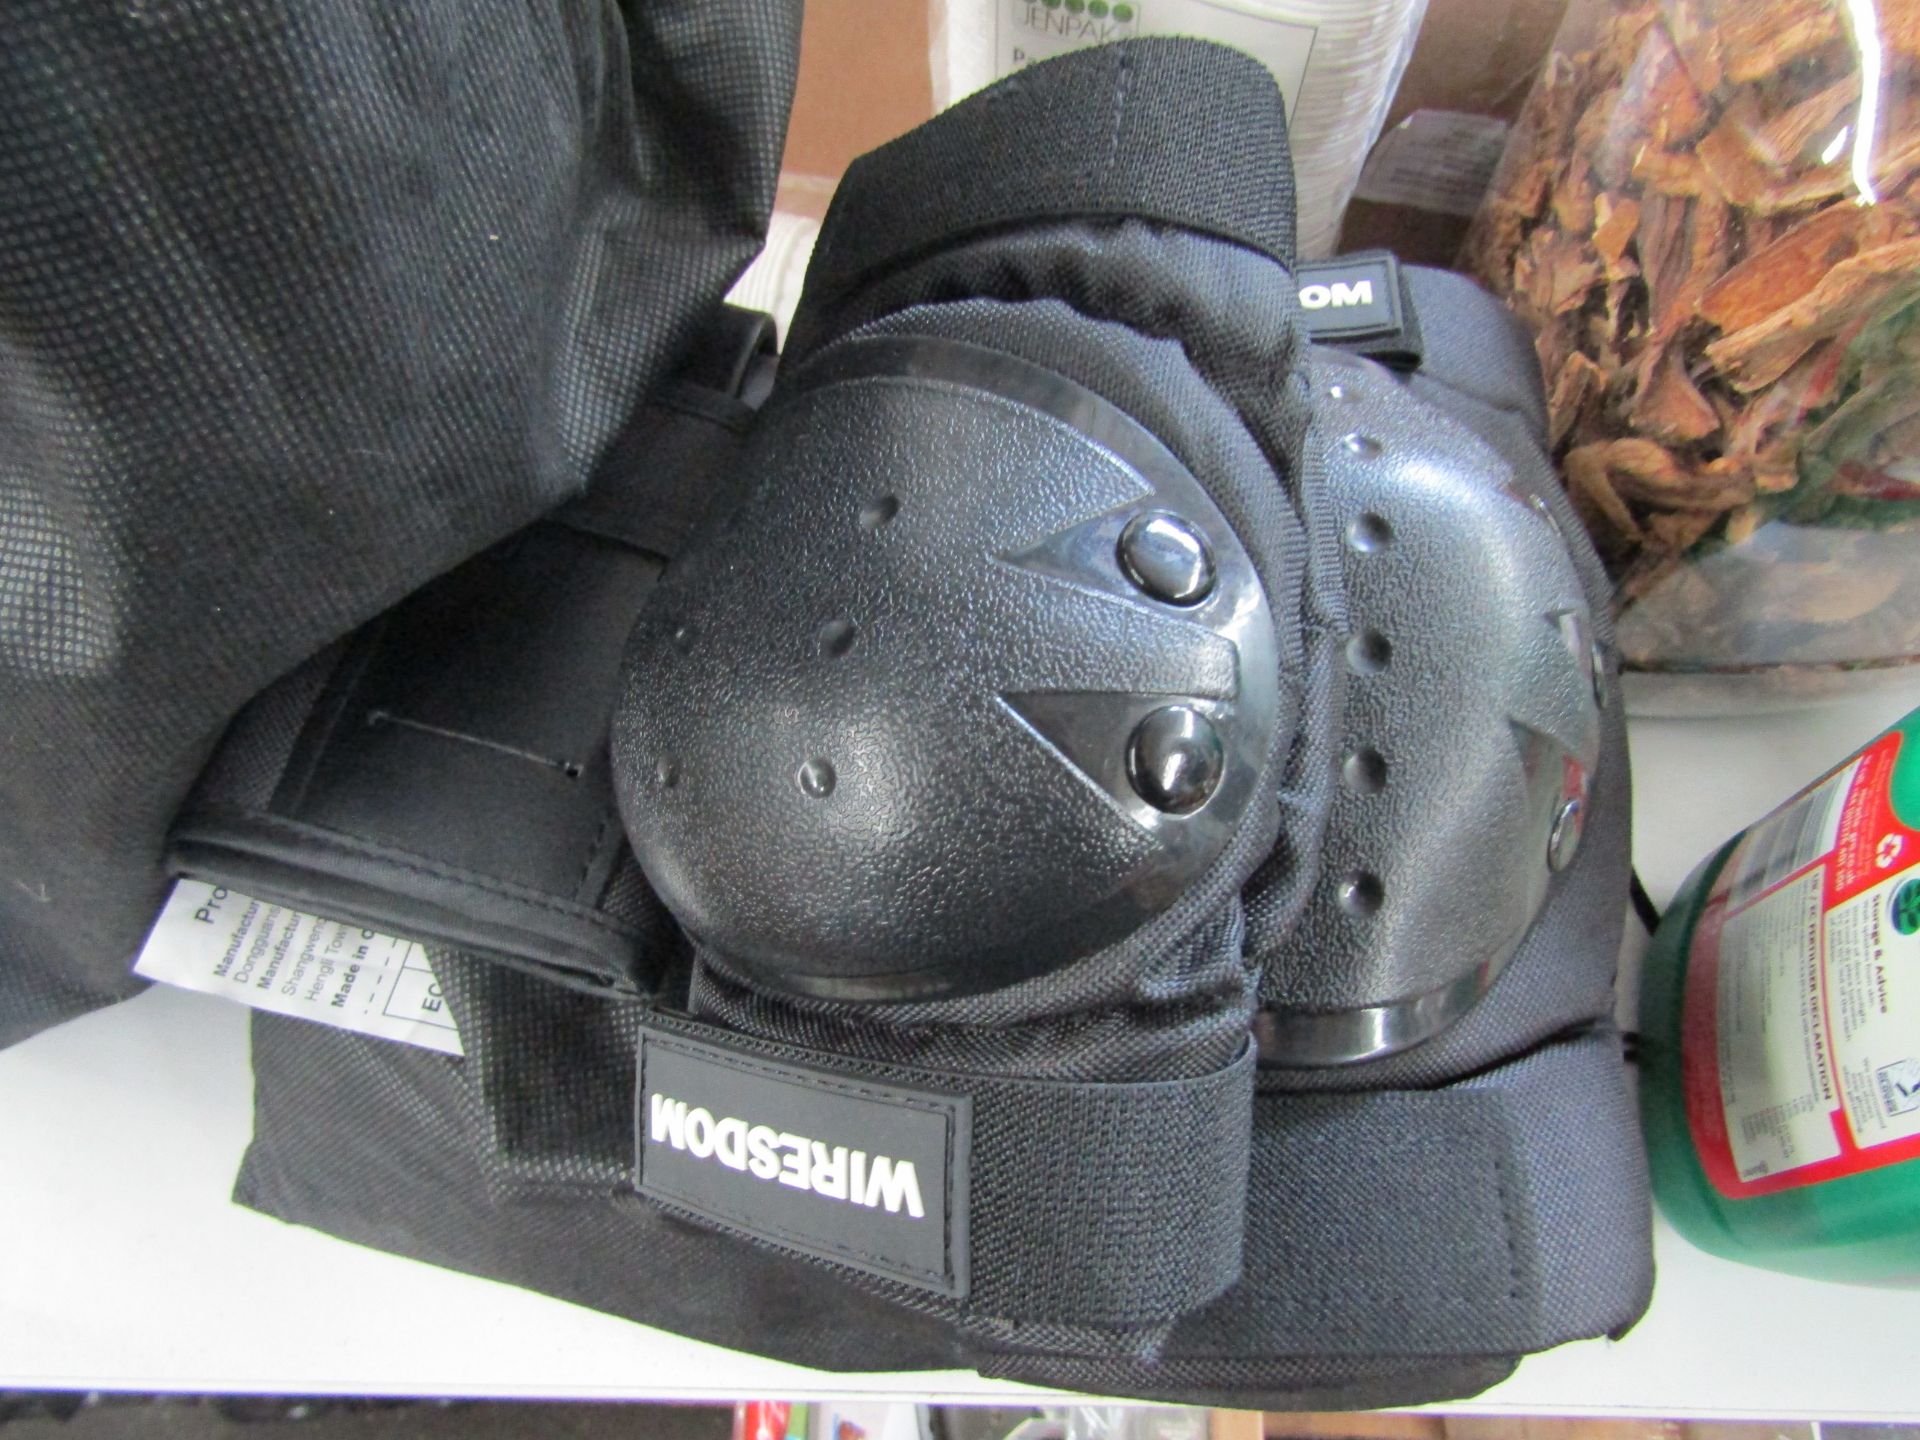 Set of Wiresdom elbow and knee pads, unused